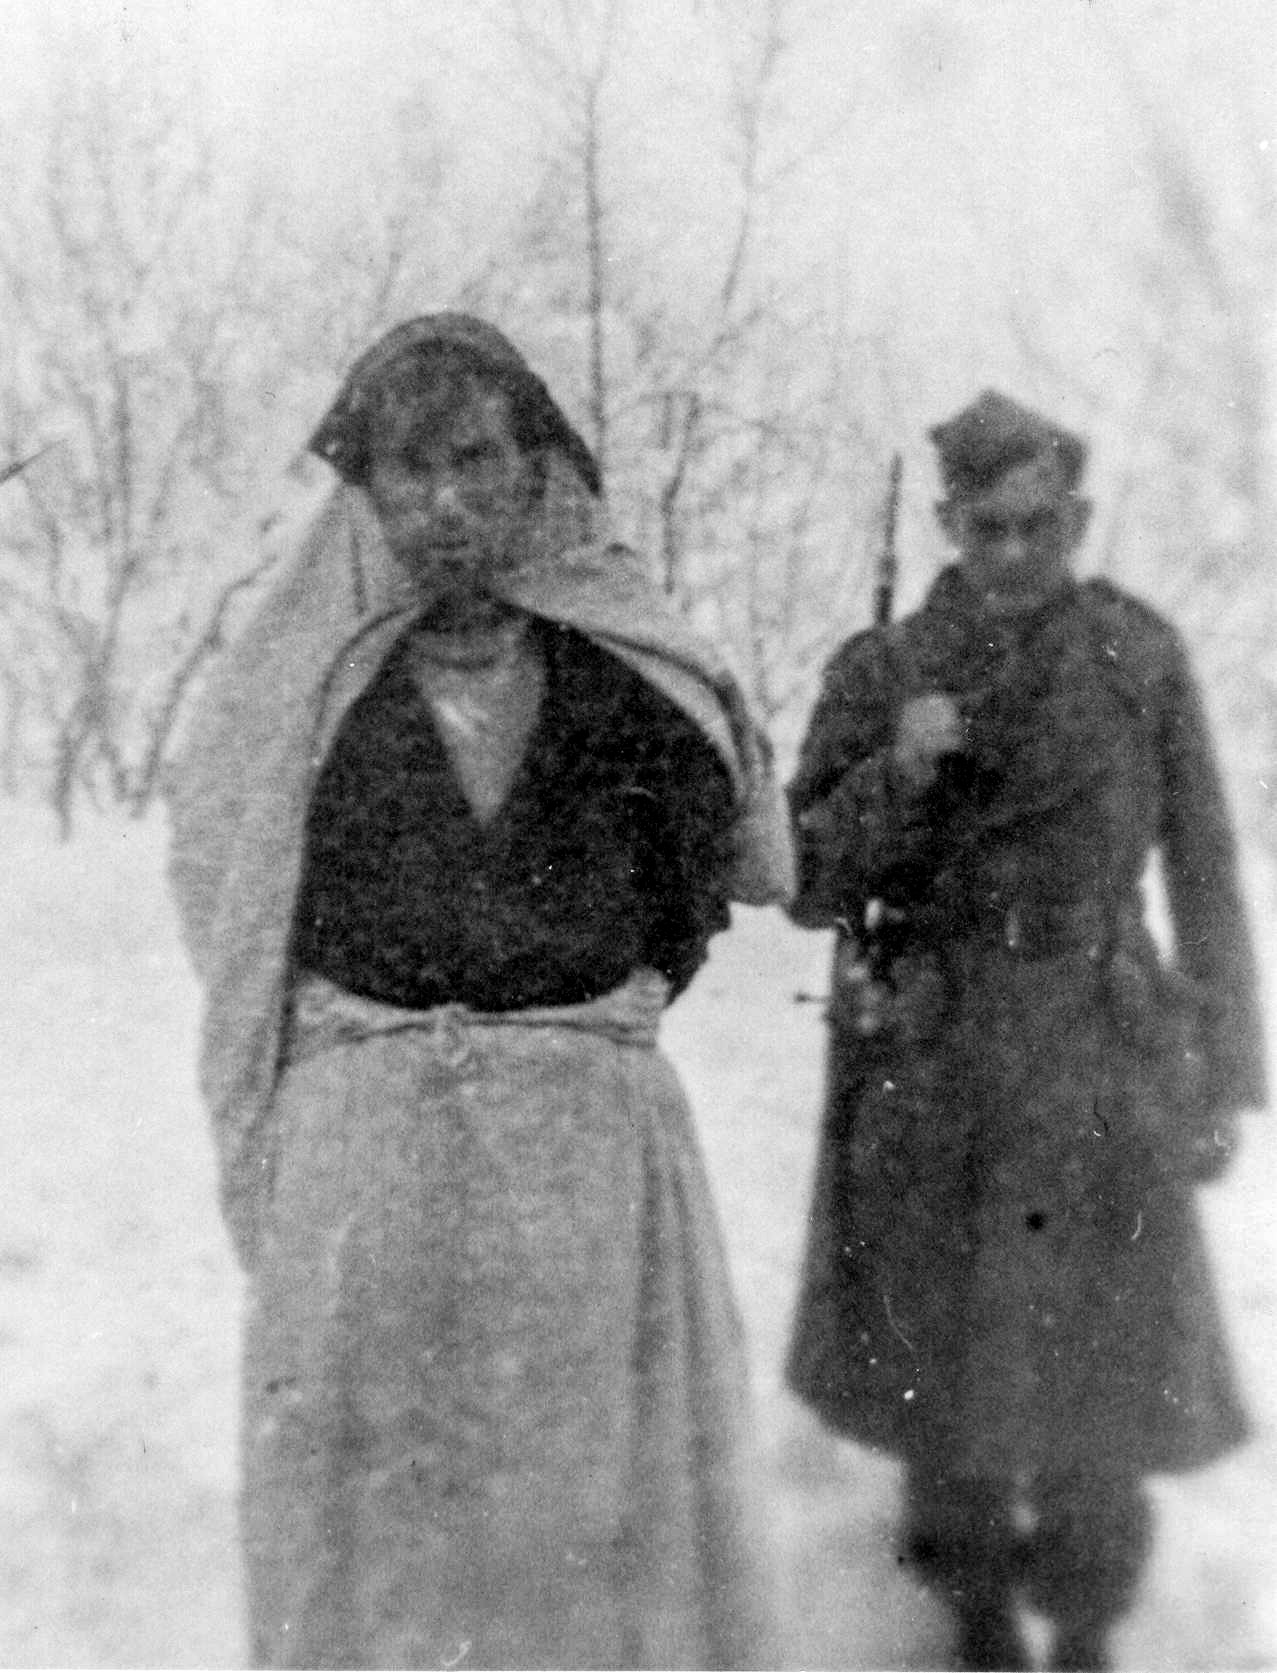 Ustaše militia man captured while wearing women’s clothes. Yugoslav partisans captured him while trying to hide. Photo by anonymous (c. 1944-45). PD-Pursuant to Yugoslav Copyright Act of 1978. Wikimedia Commons